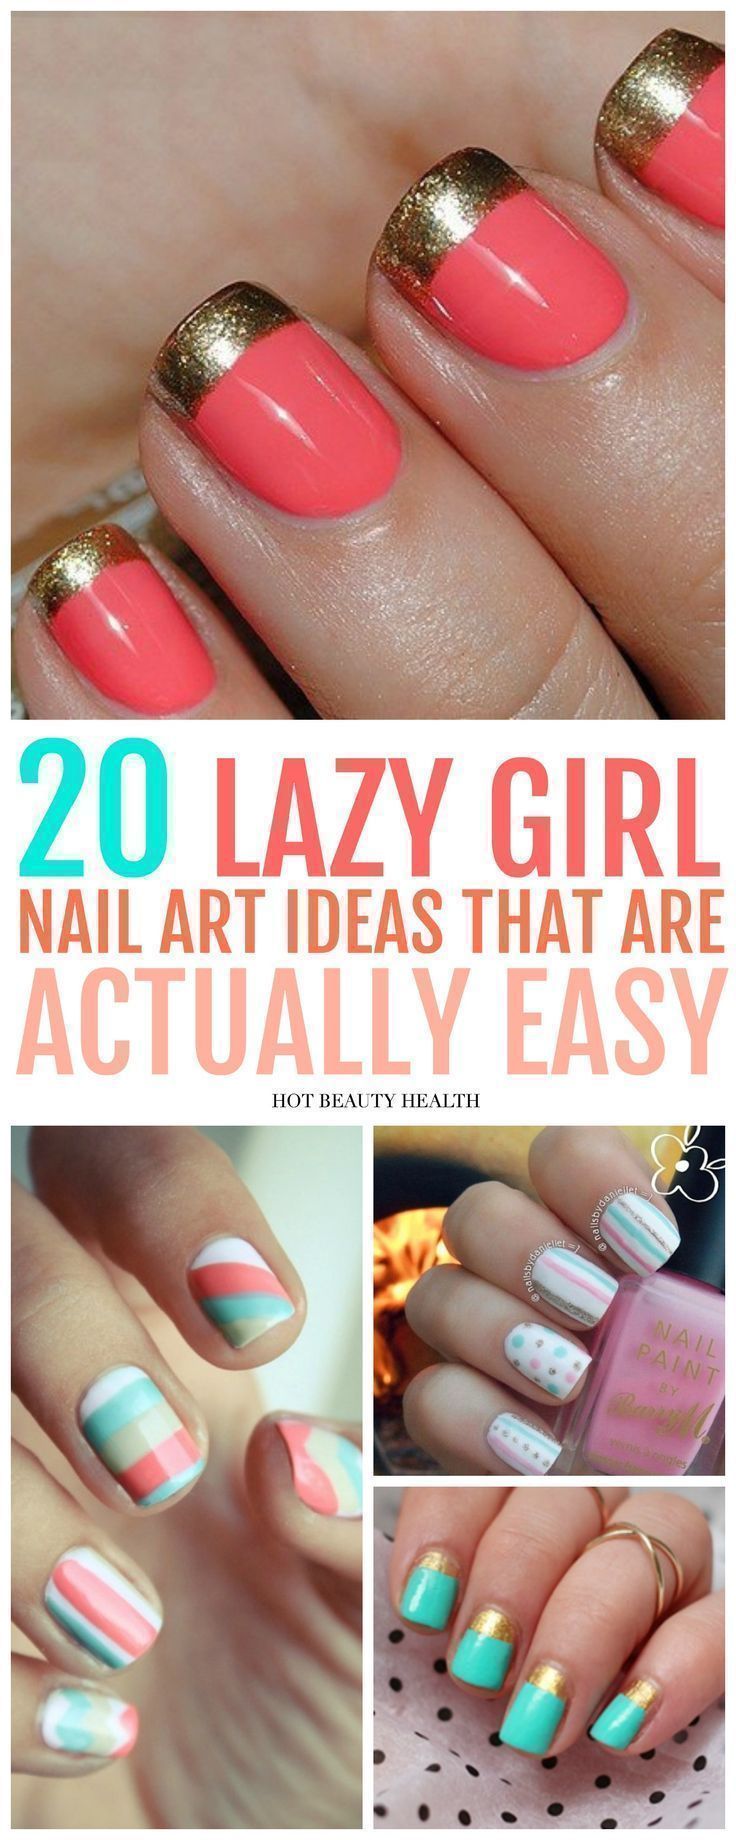 20 Simple Nail Designs for Beginners - Hot Beauty Health - 20 Simple Nail Designs for Beginners - Hot Beauty Health -   18 beauty Art simple ideas